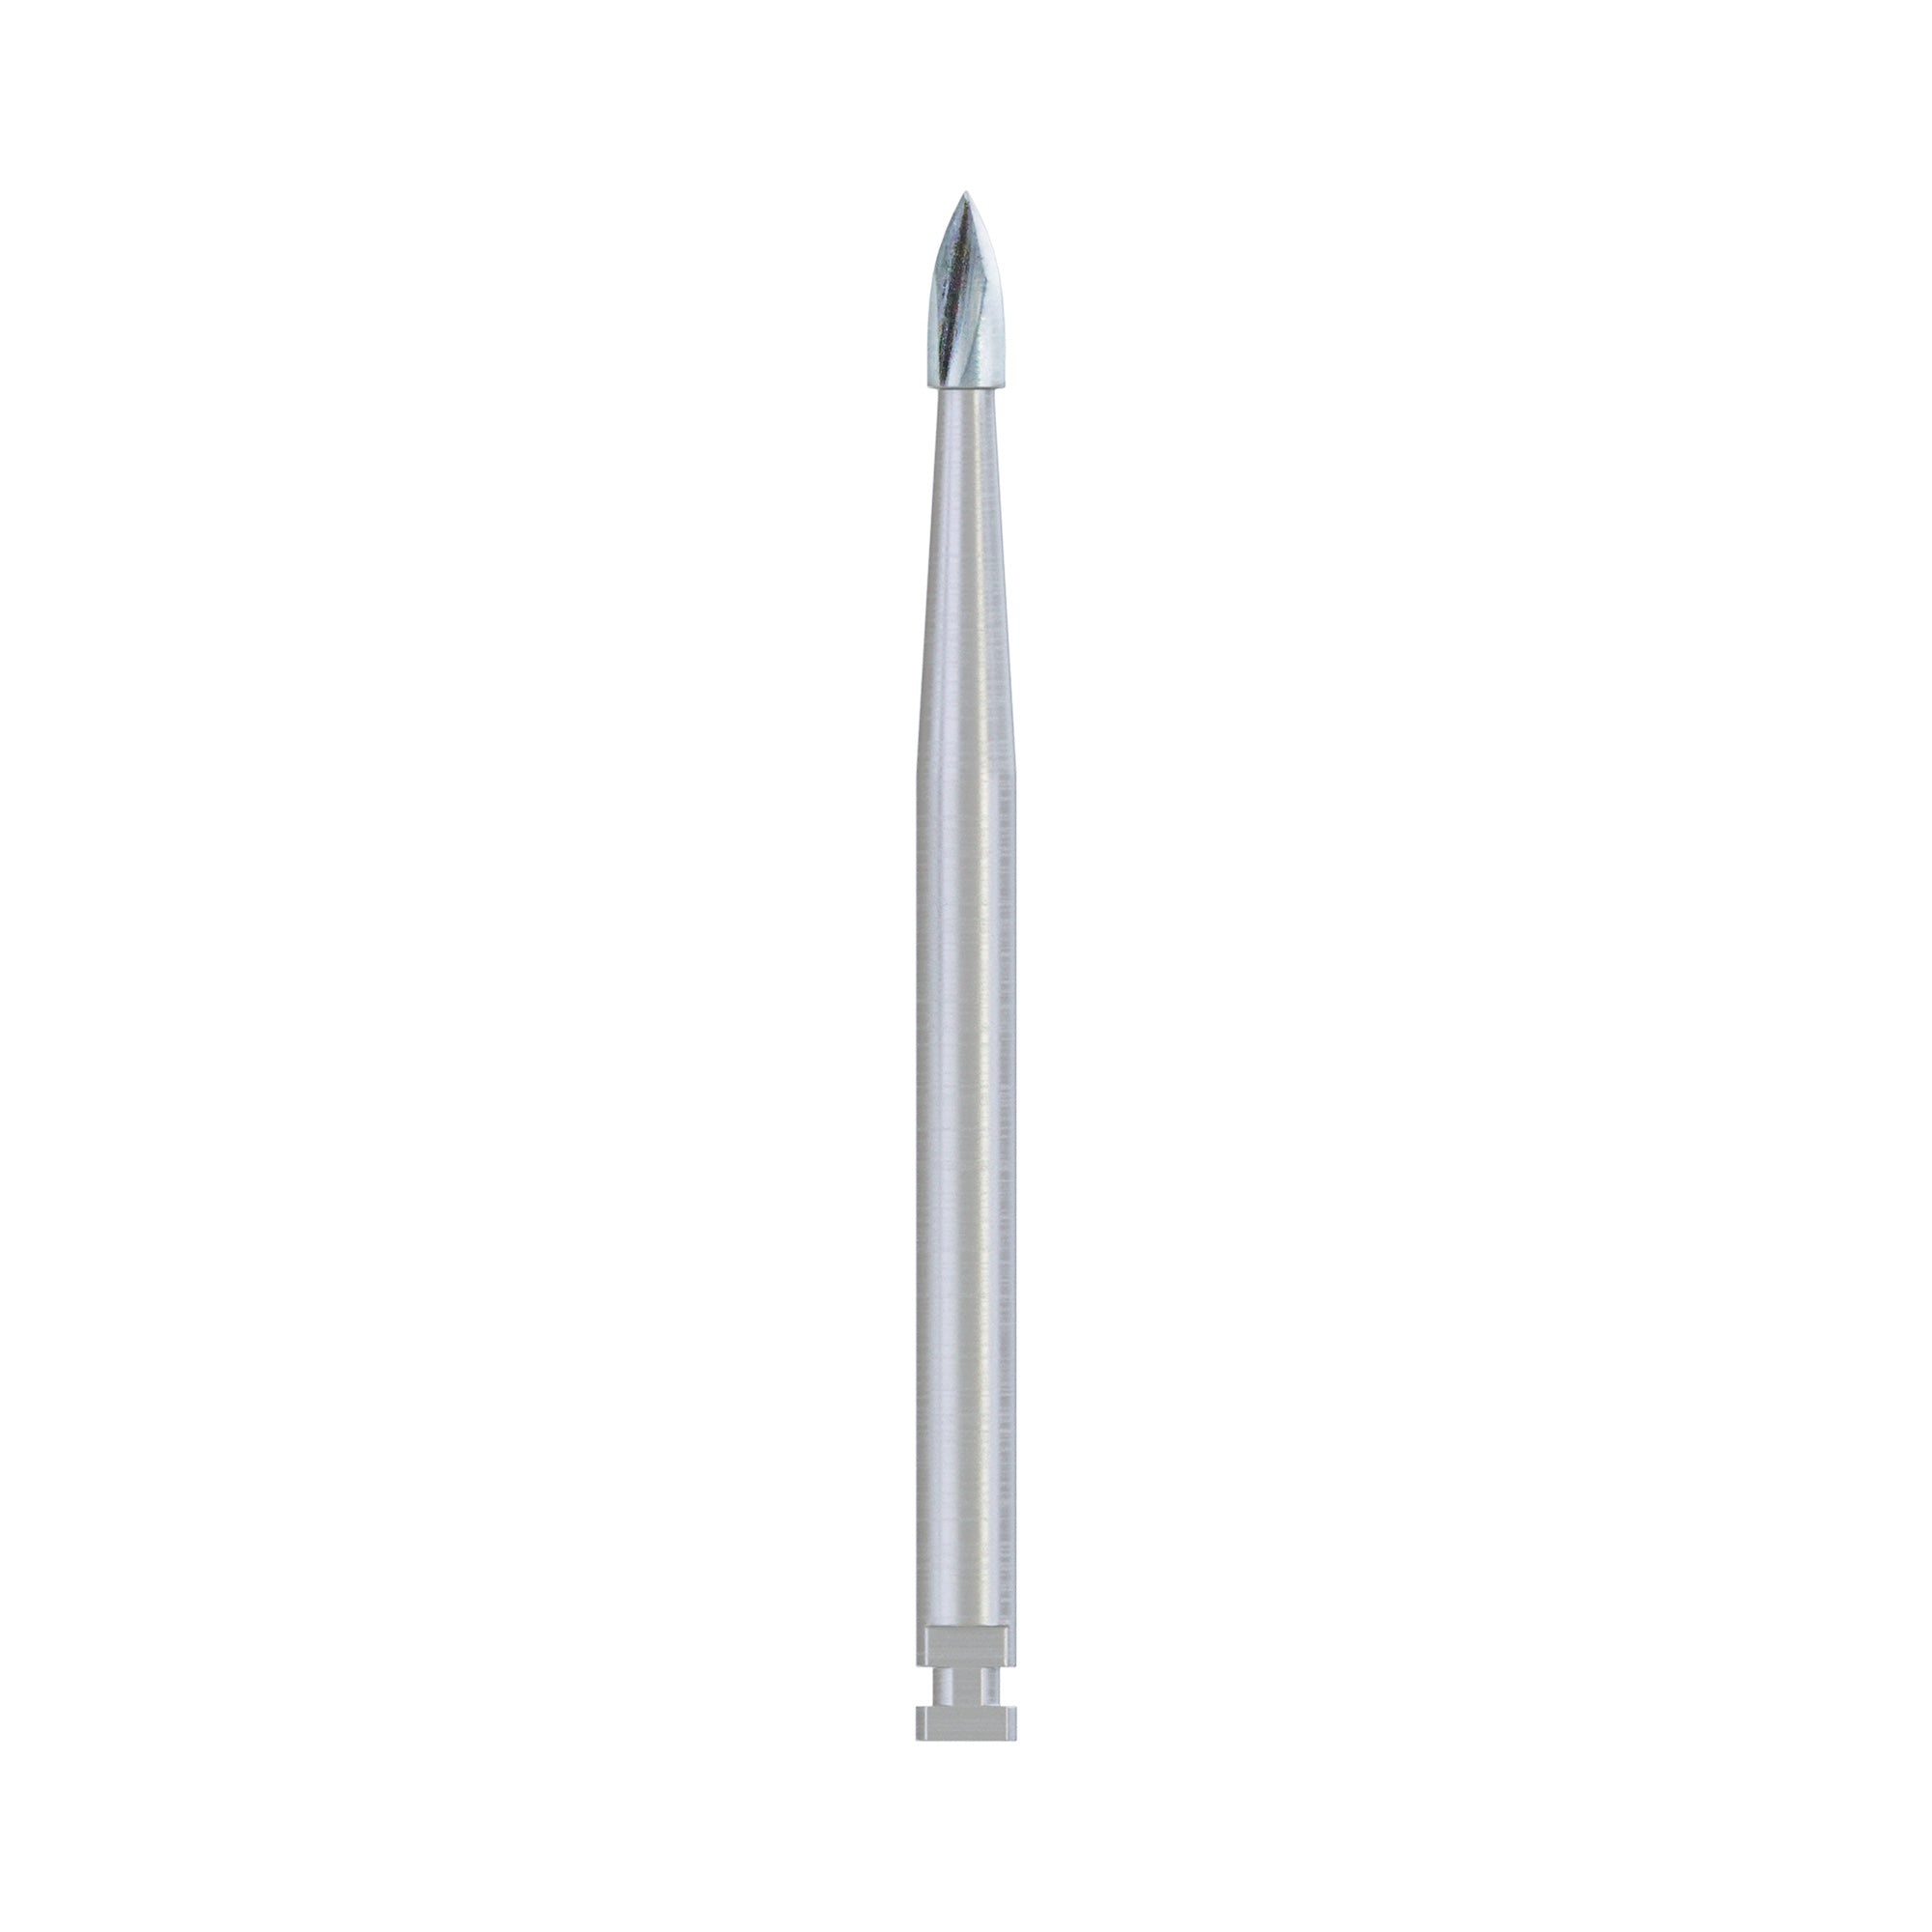 DSI Surgical Marking Pilot Drill Ø1.9mm For Initial Socket Preparation